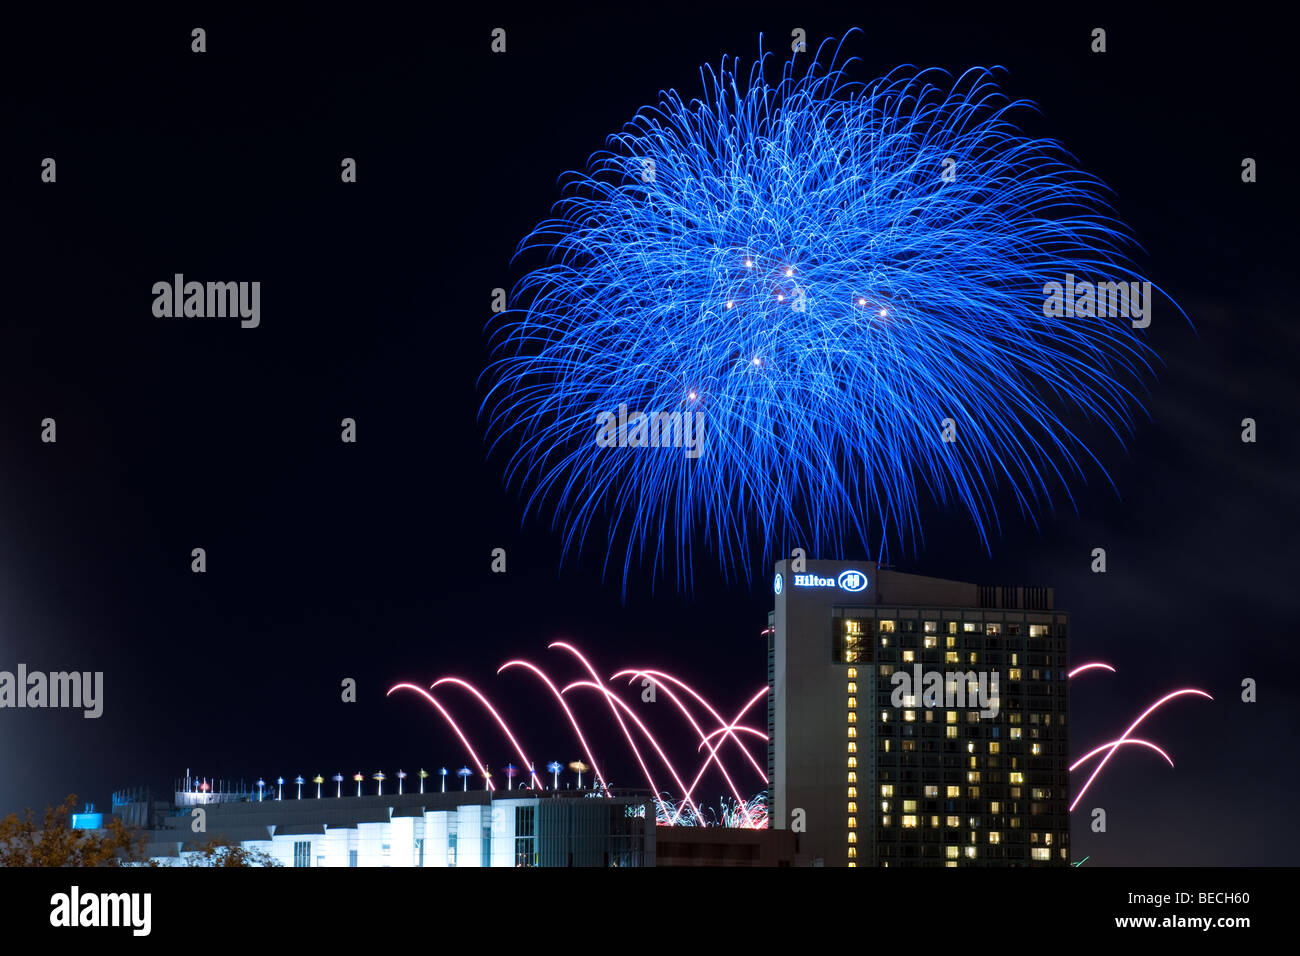 The international fireworks competition a.k.a. the 'Sound of Light' at the Casino du Lac-Leamy / Hilton Hotel in Hull, Quebec. Stock Photo